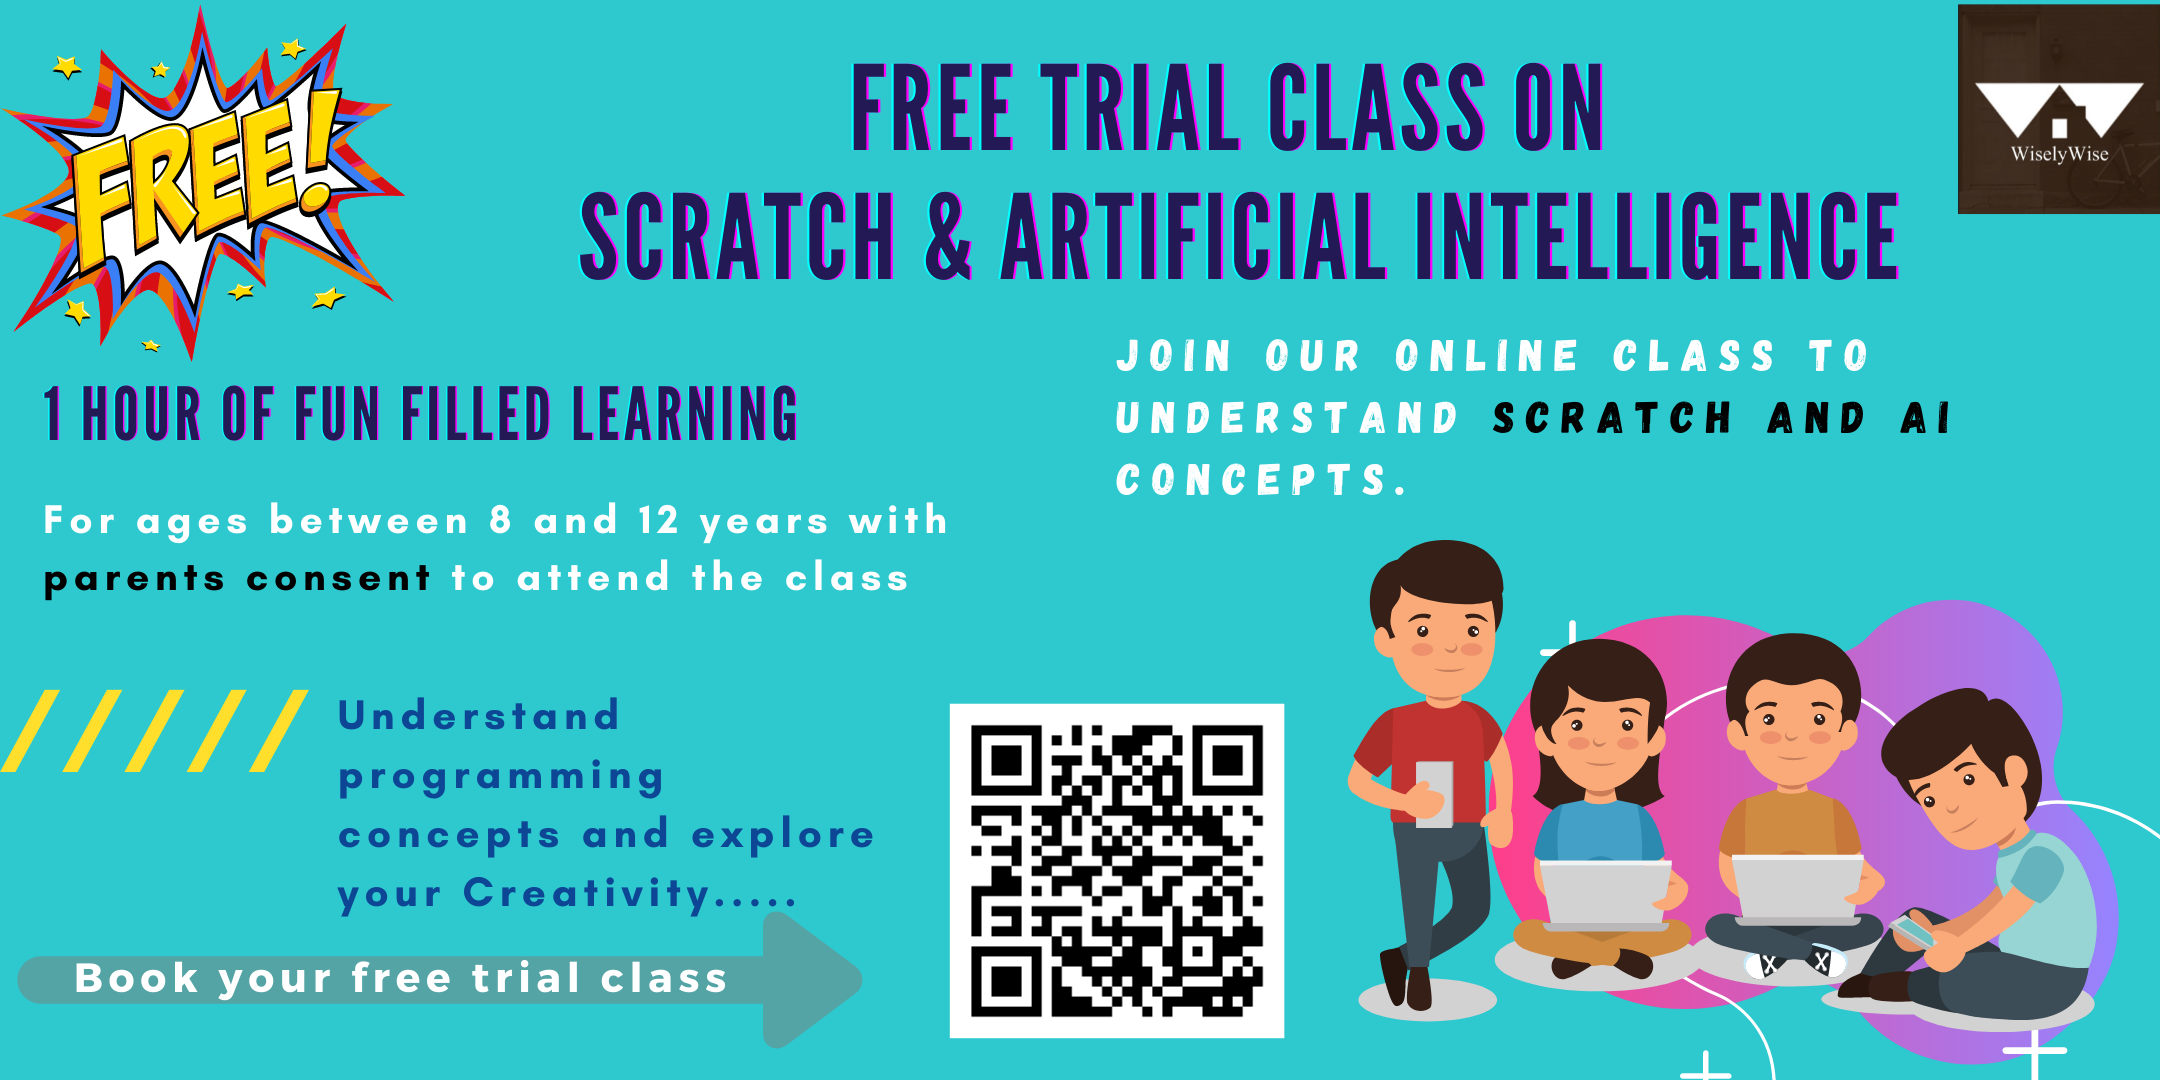 Free Trial Class on Scratch and Artificial Intelligence